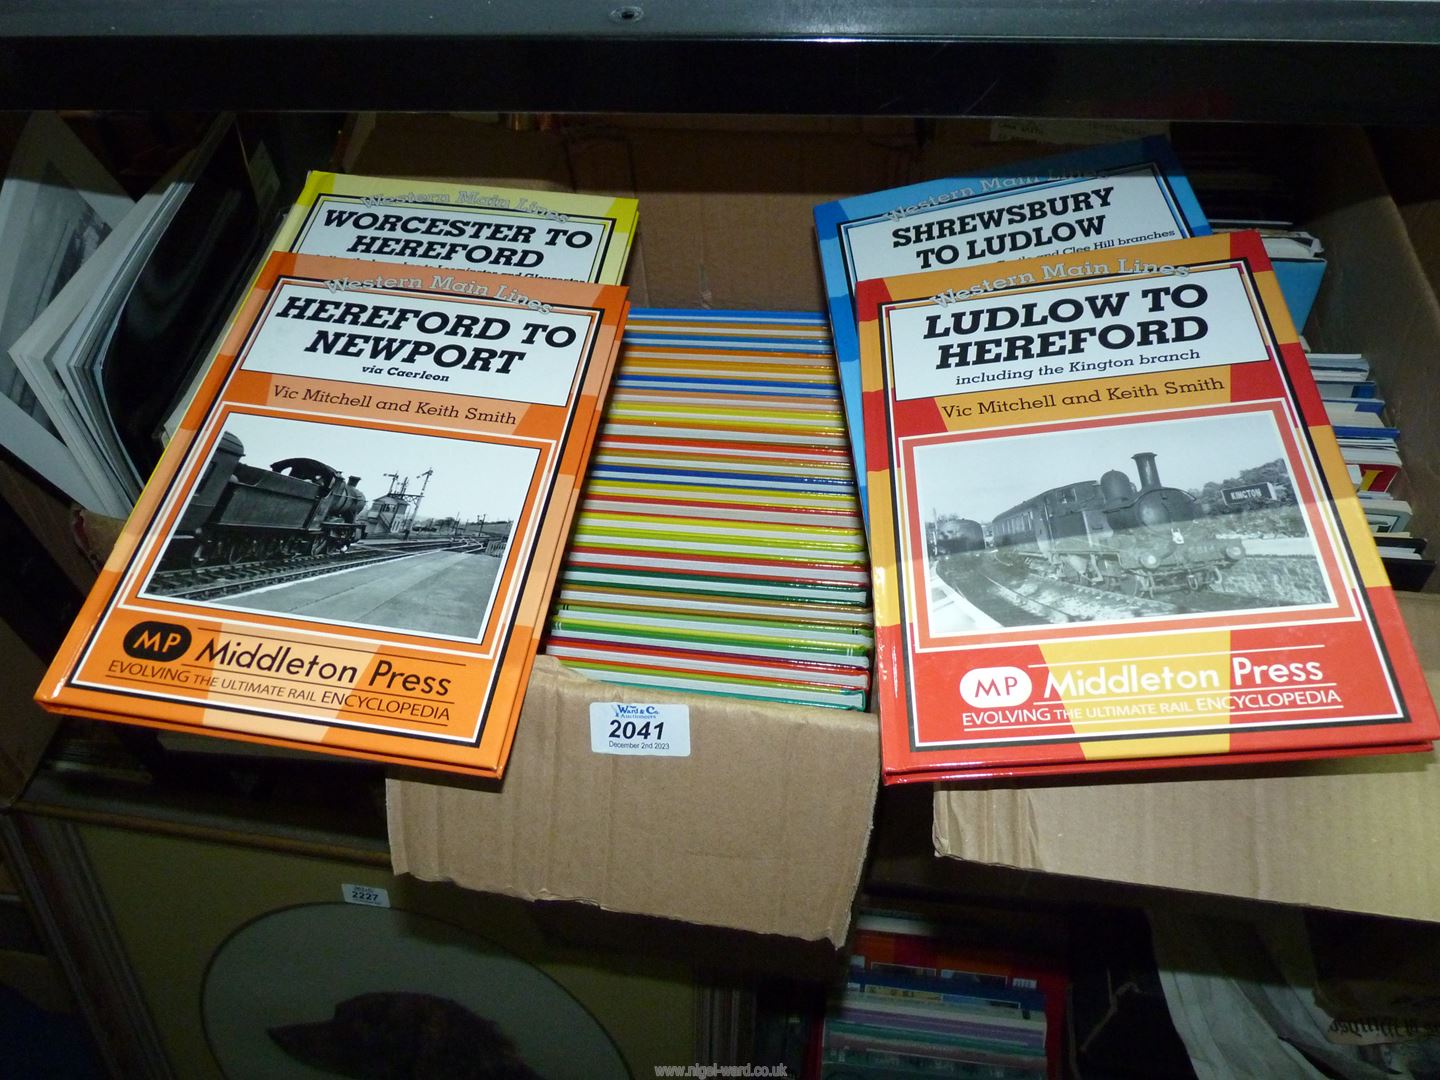 A quantity of Western Main Lines books, Worcester to Hereford, Hereford to Newport, - Image 2 of 2